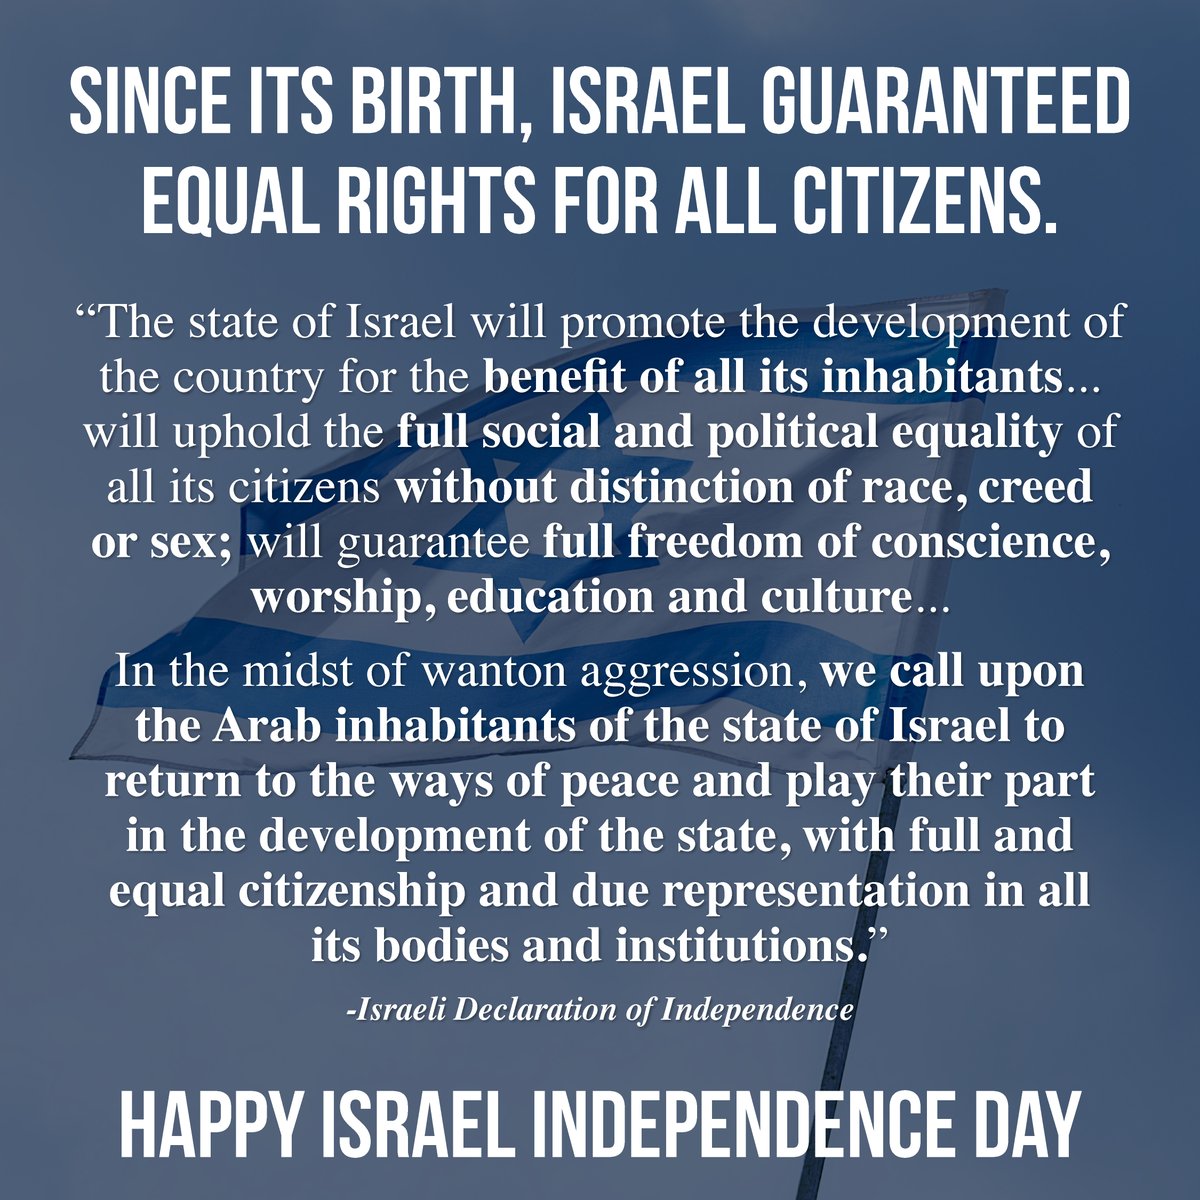 Israel is not an apartheid state and never has been. Since its birth, Israel has guaranteed equal rights for all its citizens. In fact, many Arabs prefer life under Israeli rule to life under the PA, Hamas, or other Arab regimes throughout the Middle East.